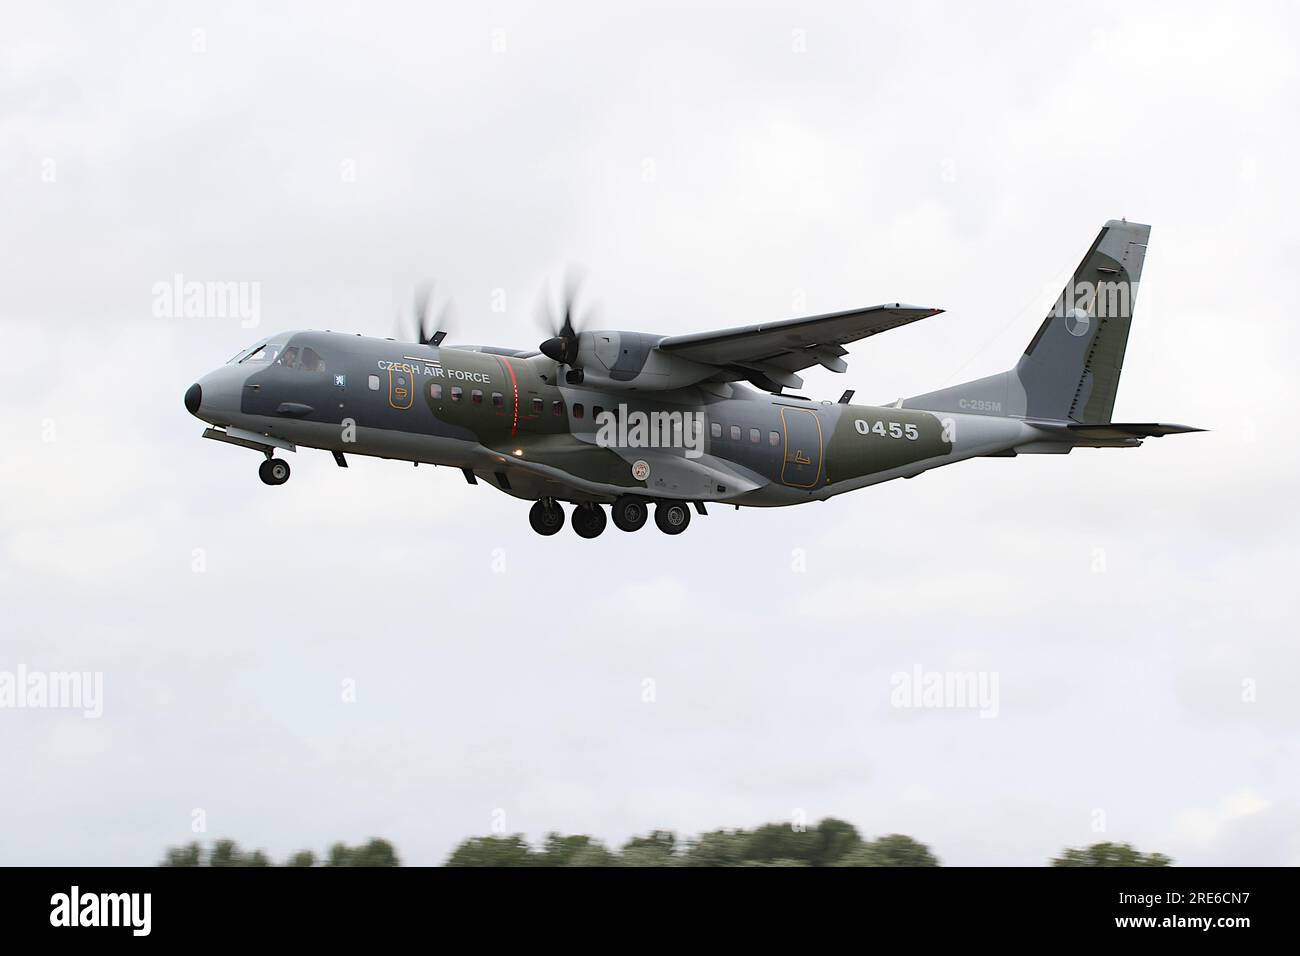 0455, a CASA C-295M transport aircraft operated by the Czech Air Force (CzAF), arriving at RAF Fairford in Gloucestershire, England to participate in the Royal International Air Tattoo 2023 (RIAT 2023). Stock Photo